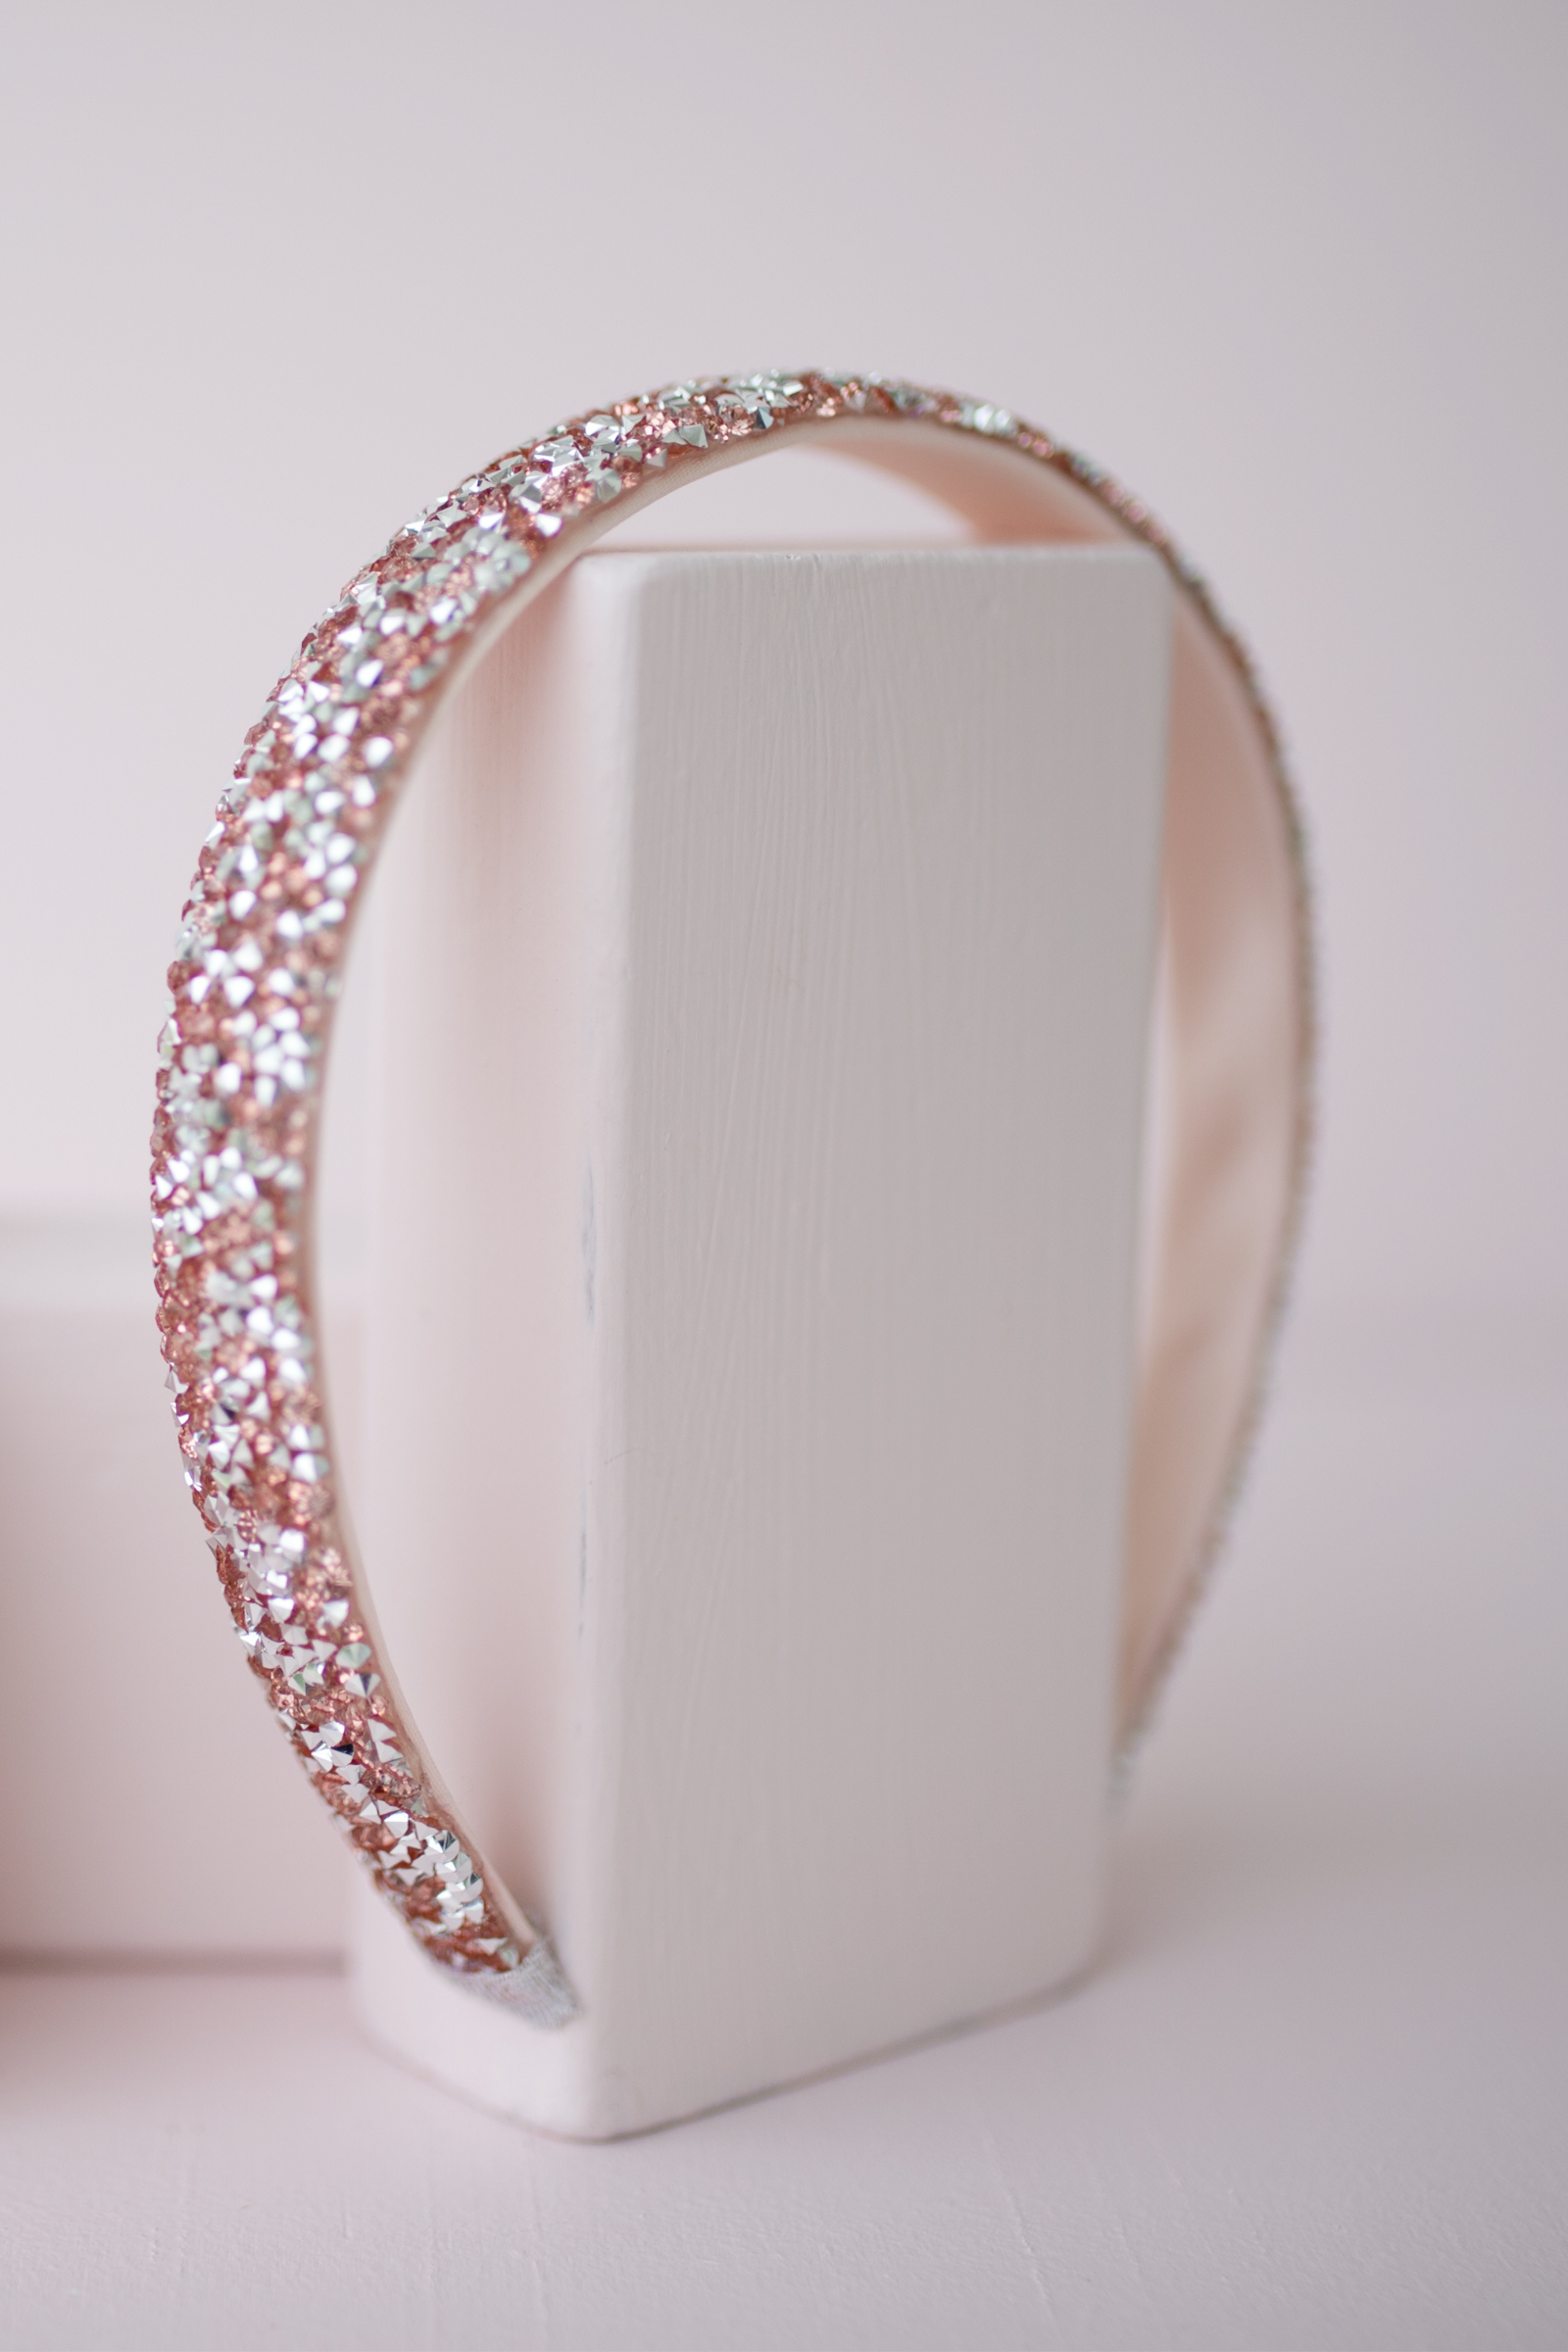 the rose gold gummy glitter boutique headband on a pale pink background